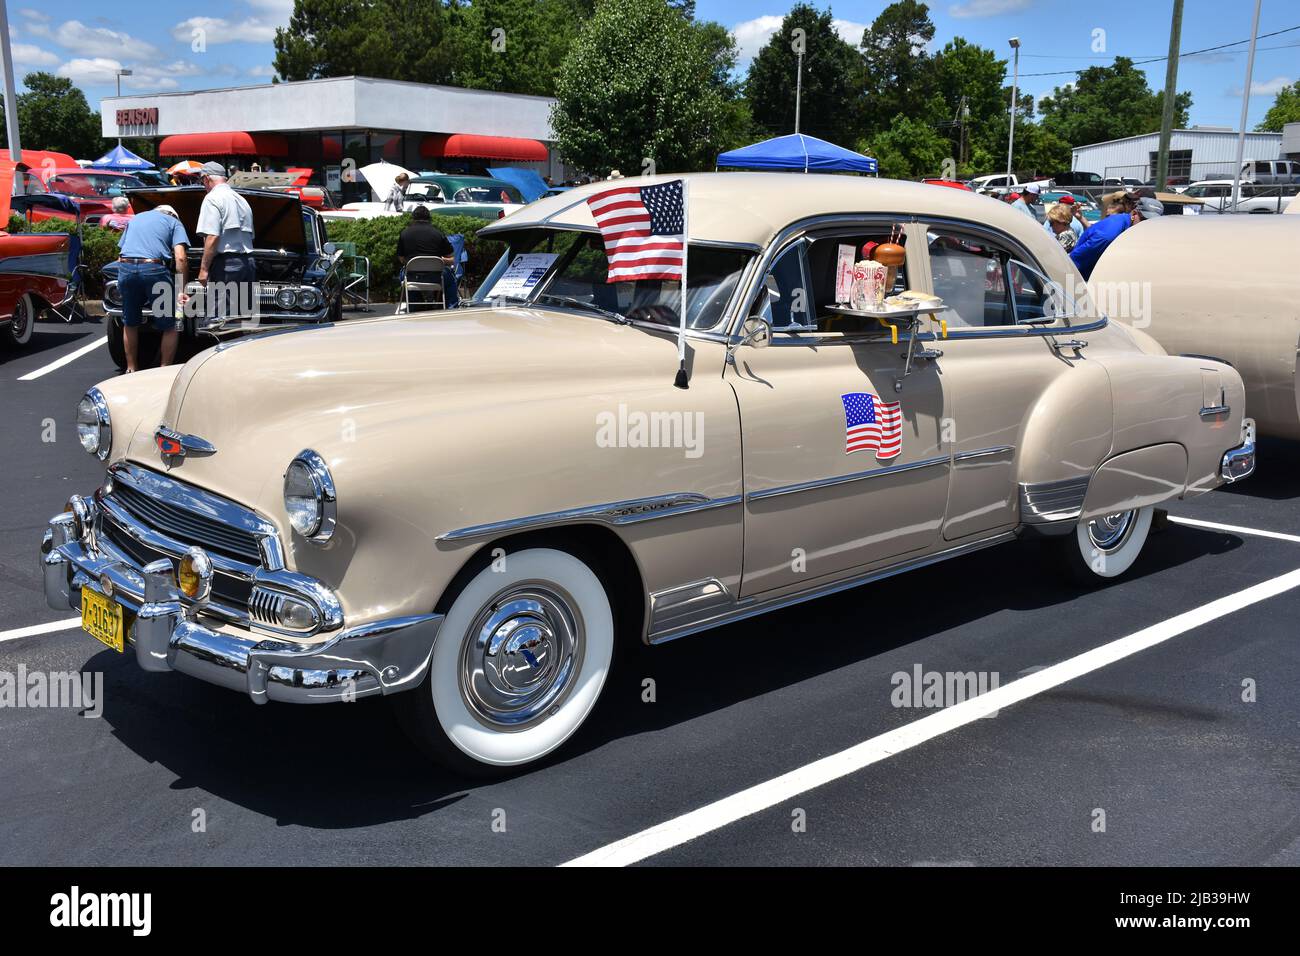 A 1951 Chevrolet Deluxe on display at a car show. Stock Photo